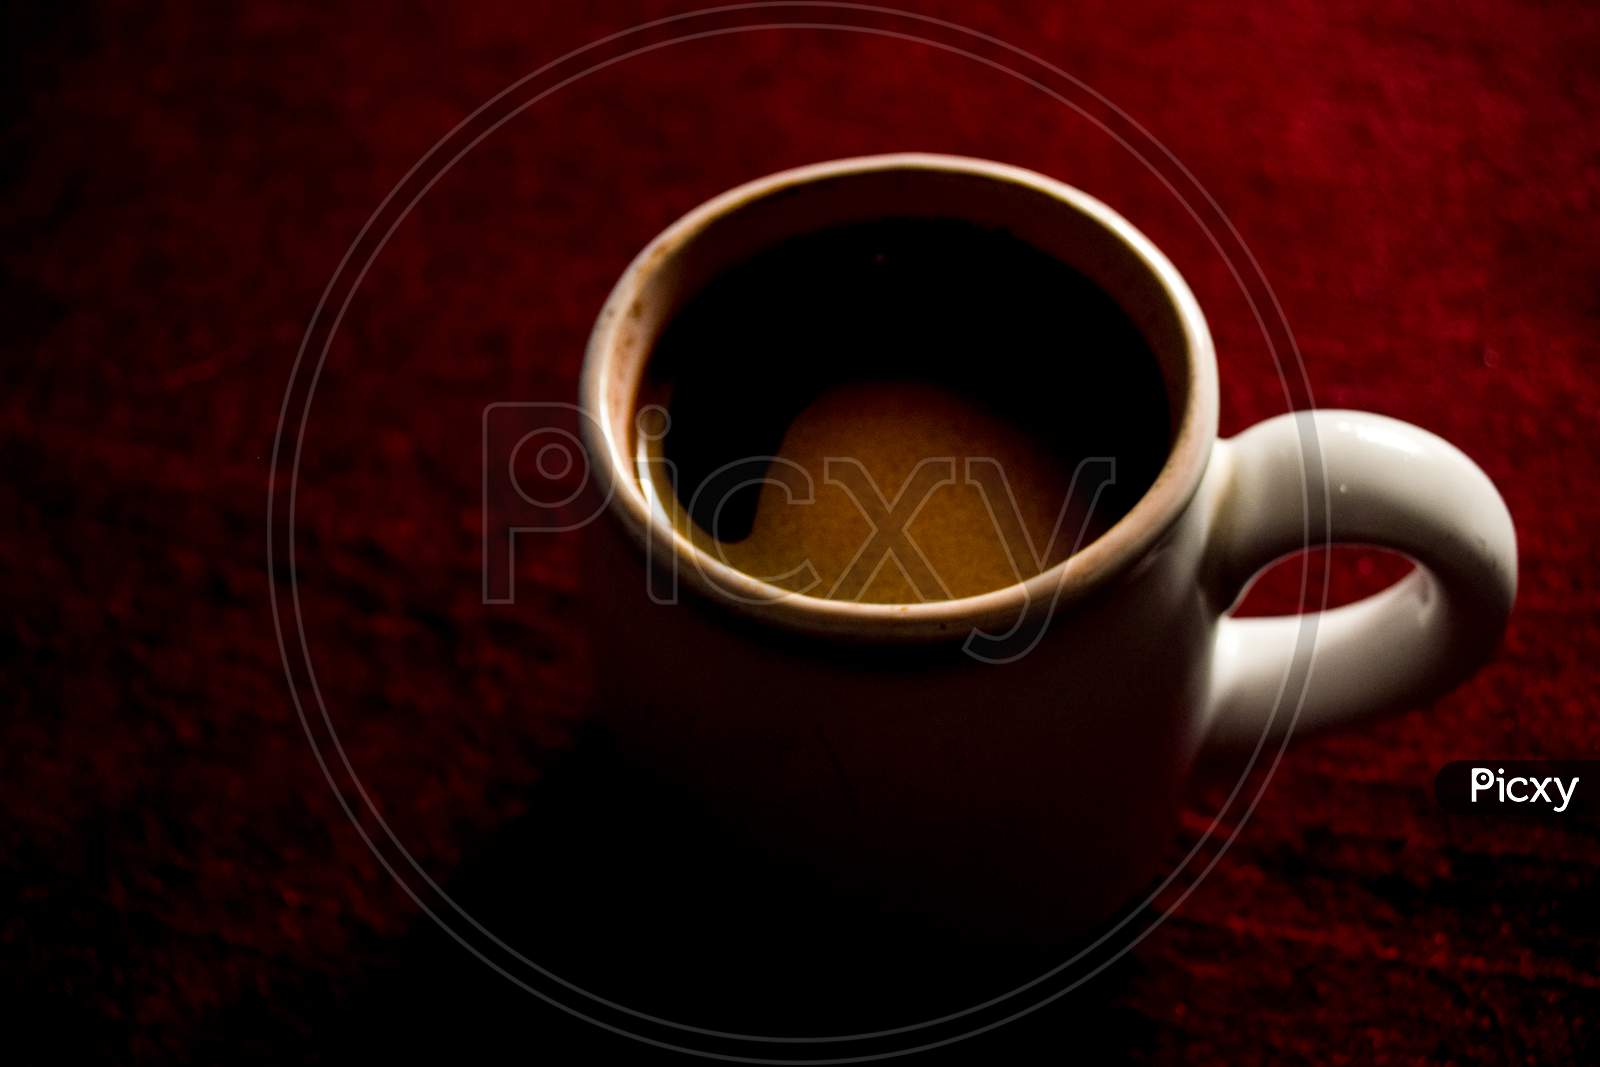 A delicious cup of coffee to add excitement to start the activity